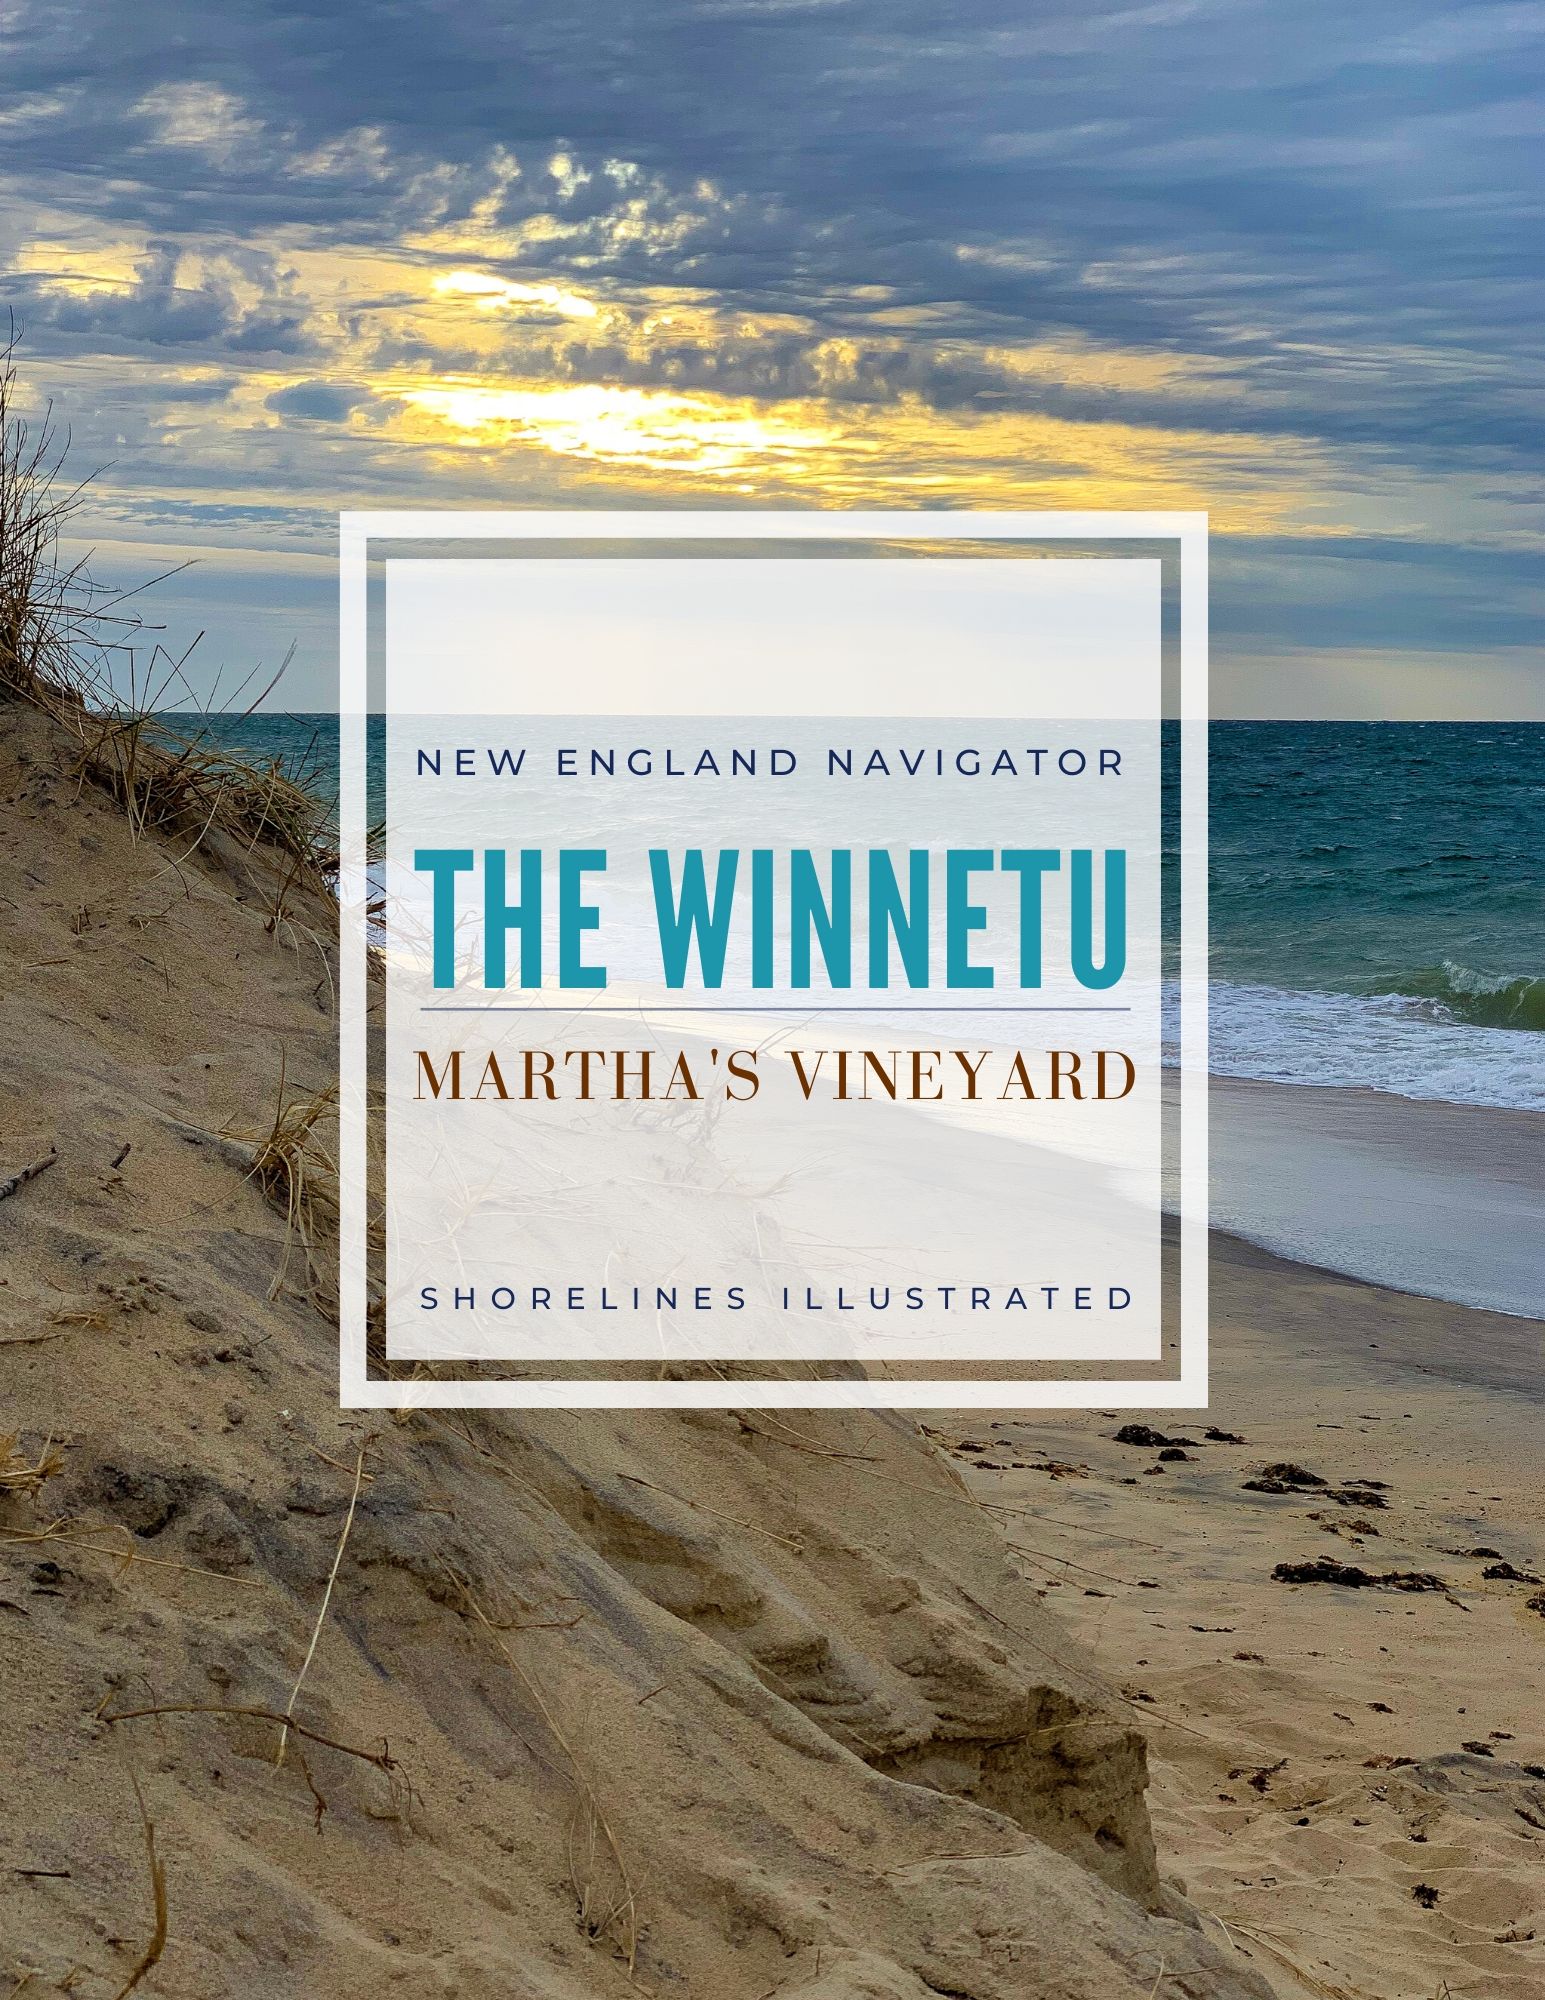 Winnetu Oceanside Resort is a unique and memorable place to stay on Marthas Vineyard. Located in the Katama section of Edgartown